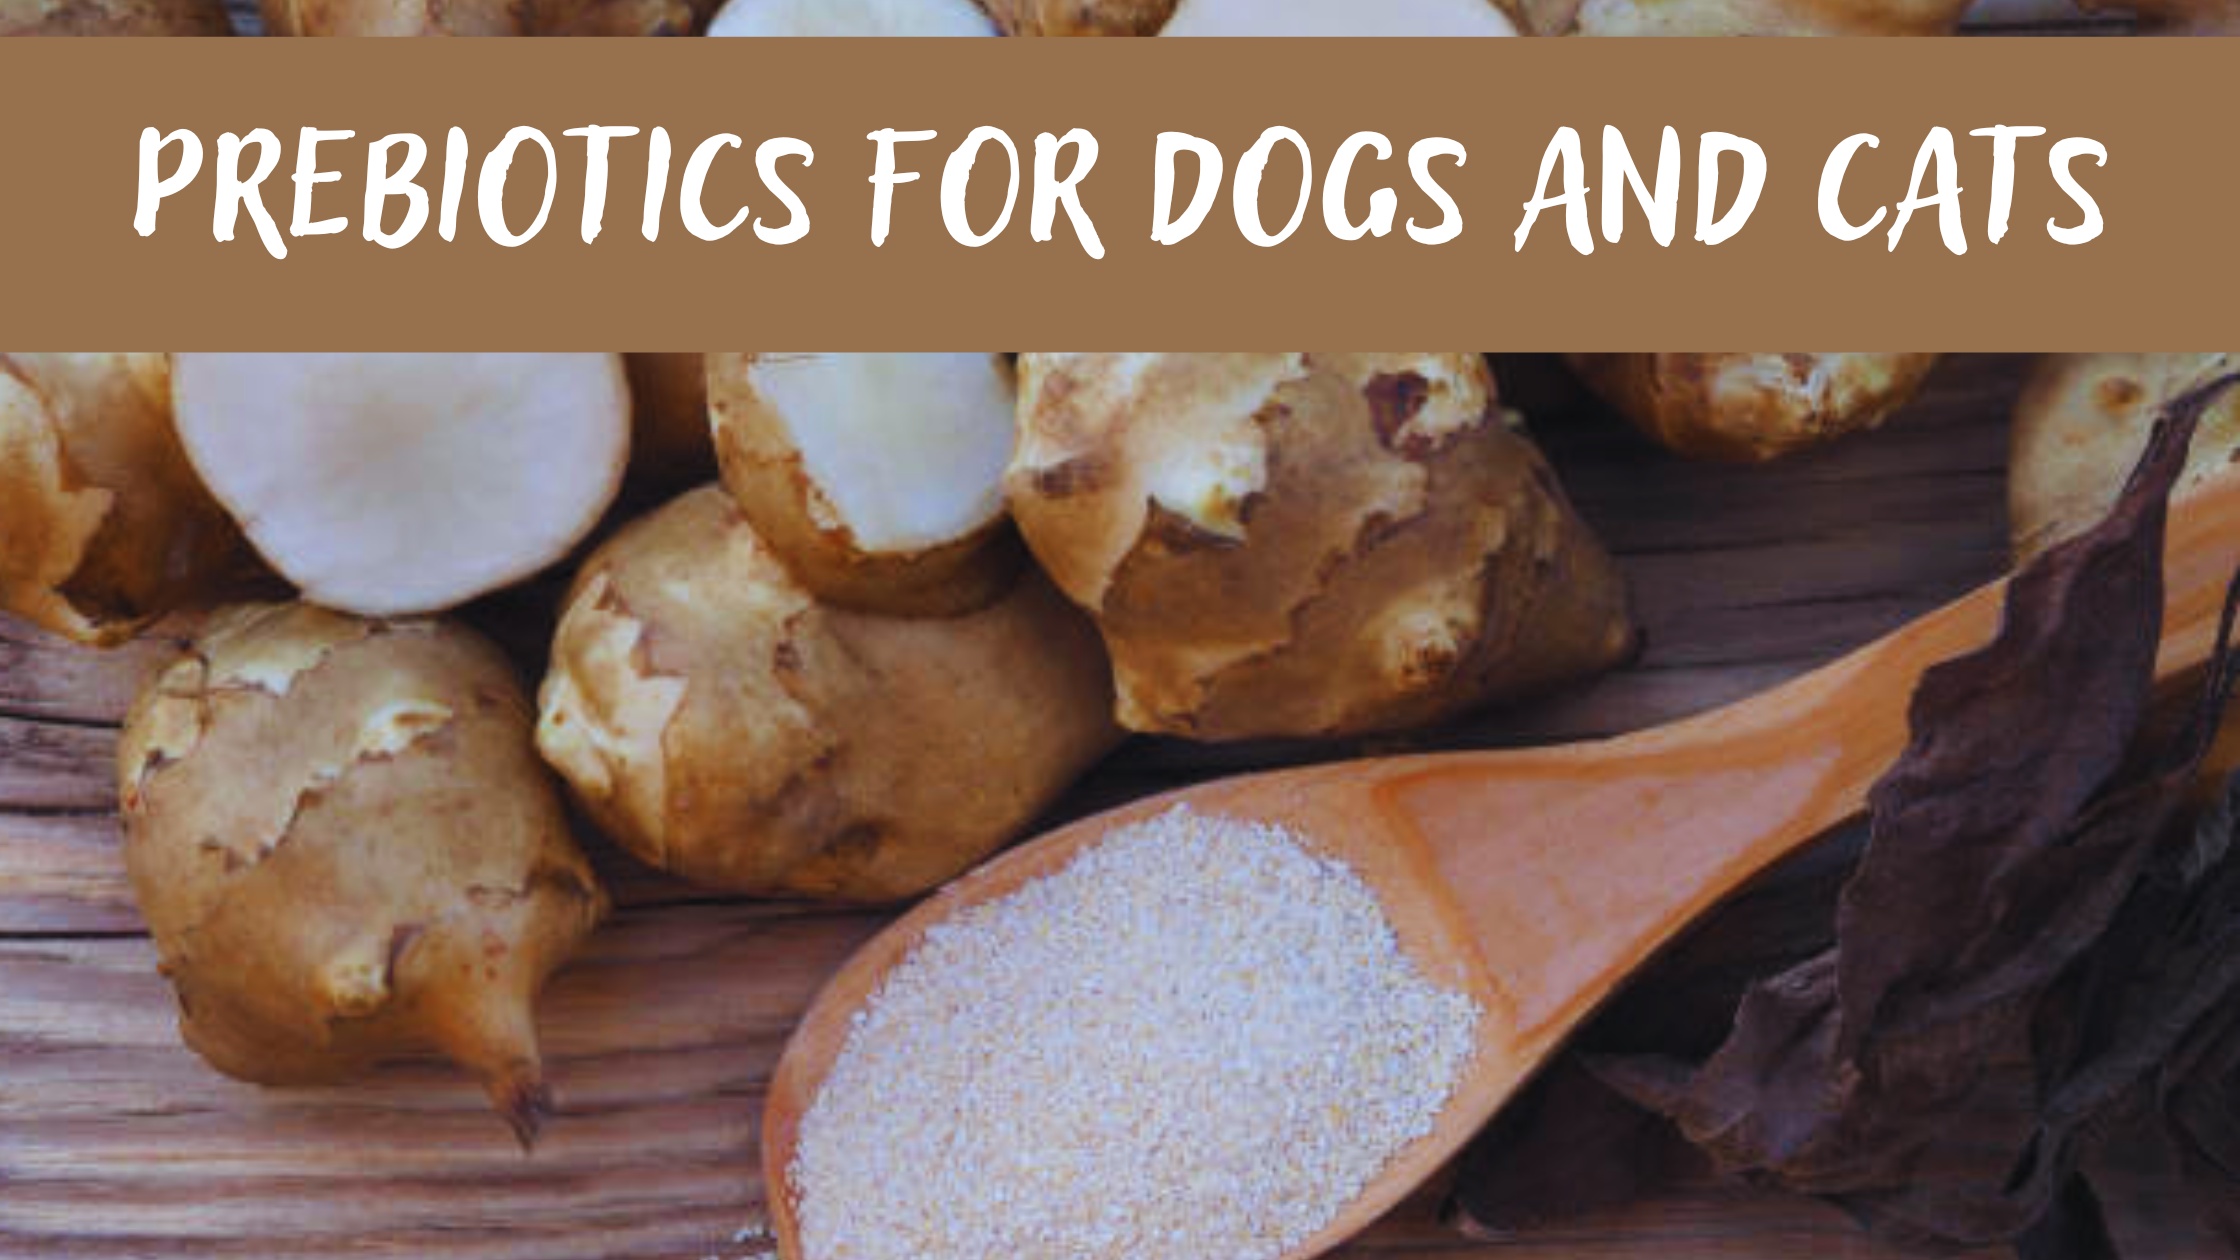 Prebiotics for dogs and cats.